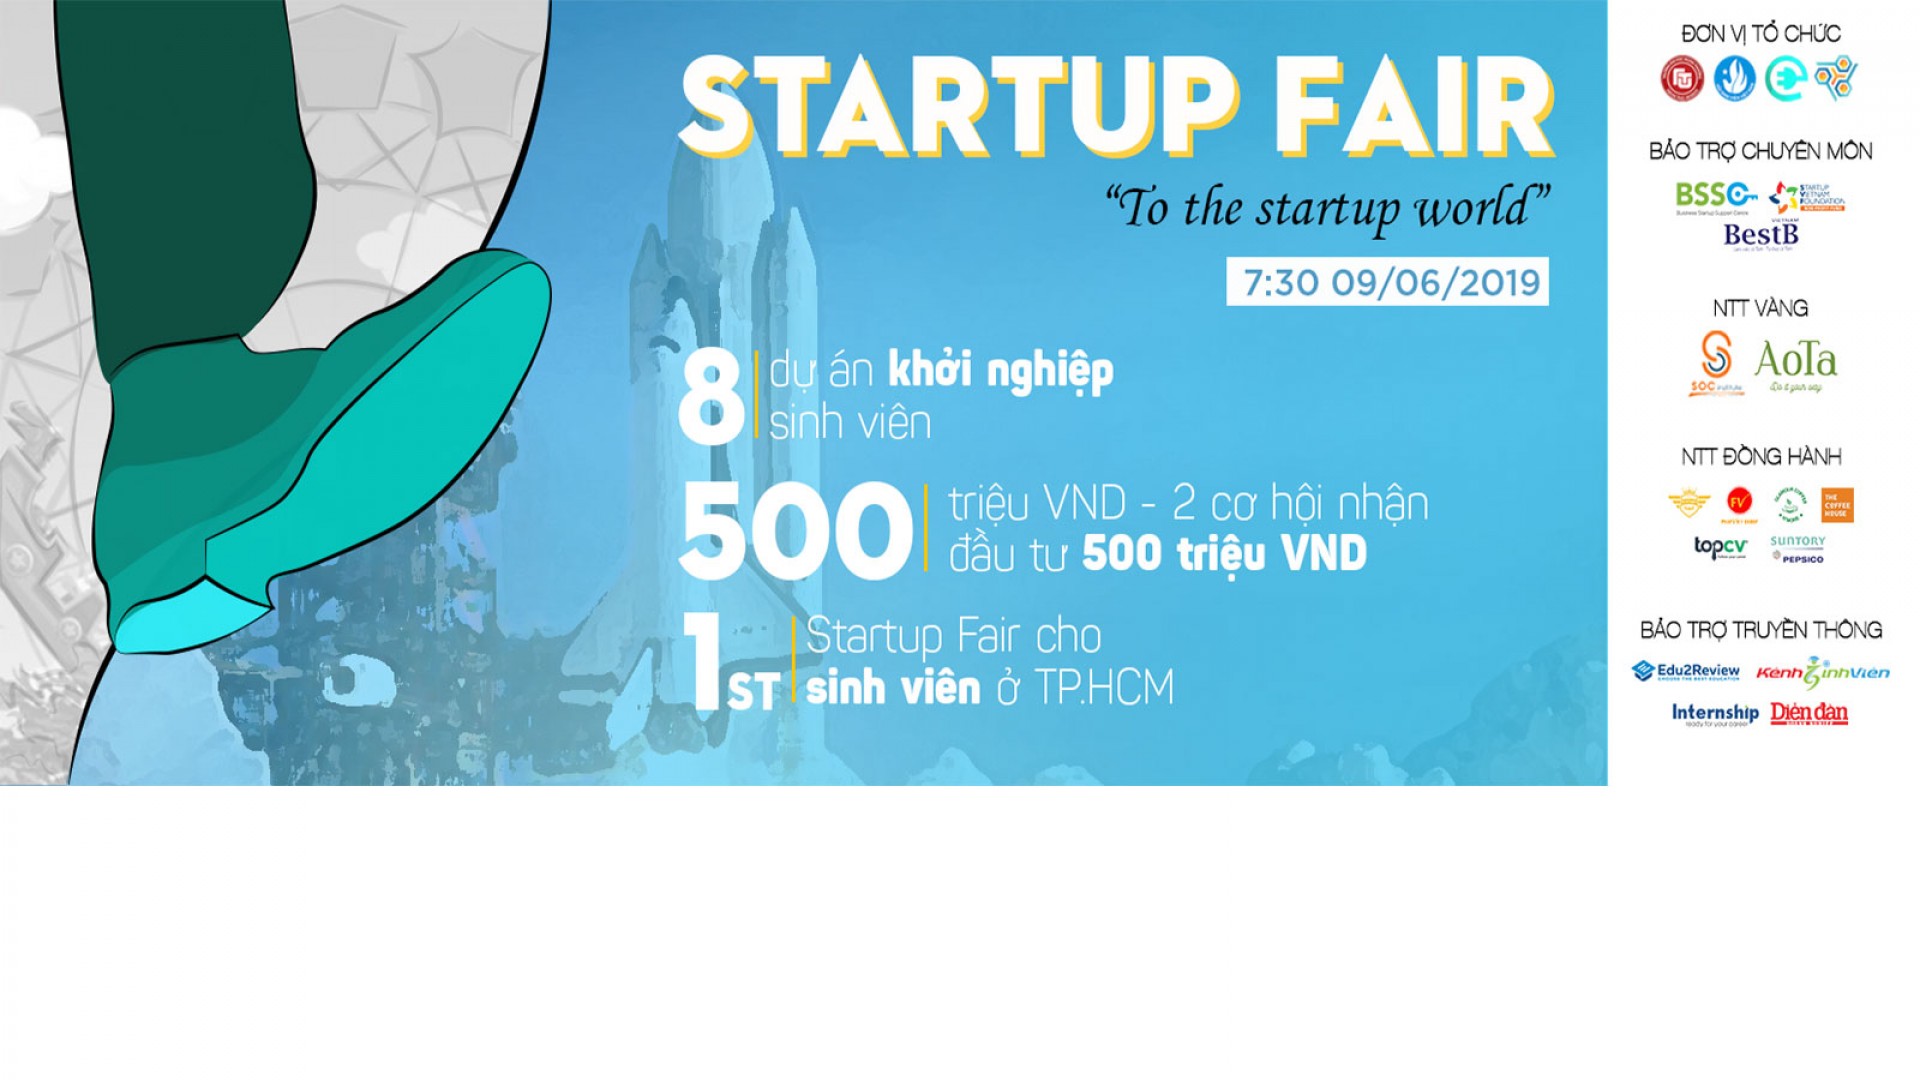  STARTUP FAIR - ROAD TO THE STARTUP WORLD